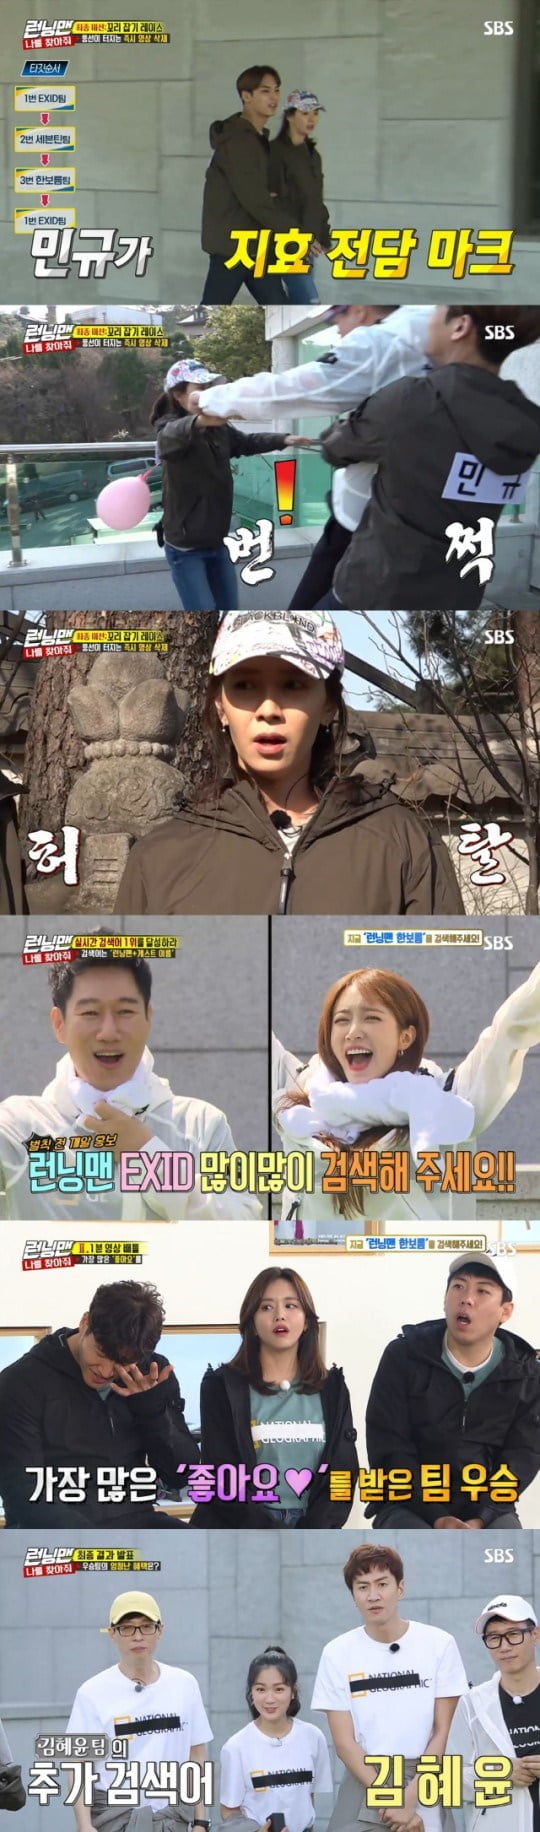 Seventeen Mingyu and Ace Song Ji-hyo became the main characters of Running Man and Best 1 minute.According to Nielsen Korea, a ratings agency on the 22nd, SBS Running Man, which was broadcast on the 21st, soared to 7.1% of the highest audience rating per minute (based on the audience rating of households in the metropolitan area), and 2049 target audience rating, an important indicator of major advertising officials, ranked first in the same time zone with 4% (based on two viewer ratings).On this day, Seventeens victory and Mingyu, EXIDs Hani and Solji, actor Kim Hye-yoon, and actor Han Bo-reum appeared as guests and played the first real-time search word war.Seventeen teamed up with Song Ji-hyo and Jeon So-min, Kim Hye-yoon teamed up with Yoo Jae-Suk and Kwangsoo, and Han Bo-reum teamed up with Kim Jong-kook and Yang Se-chan.EXID was in a boat with Ji Suk-jin and Haha; they had to go through three rounds in total to achieve the top spot in real-time search terms before starting the game that won.The first round was the number one chart of those days. The last team was baptized with water bombs, with the number one game on the popular song chart from 1993 to 2018.Kim Hye-yoon went on a quiz with his dance skills hidden to avoid water bombs.However, Yoo Jae-Suk and Kwangsoo laughed at Kim Hye-yoon, saying, I should not have told you if I could not, and I thought I was doing well.At the end of the battle, the Han Bo-reum team became the winner of the chart of those days and benefited from the Running Man Han Bo-reum phrase at the top of the screen.The second team was the Seventeen team, the third team was the Kim Hye-yoon team, and the water cannon penalty went to the last EXID team.The second round was a battle in which the team that produced a one-minute promotional video for each team won the most likes on the Running Man official SNS.Kim Hye-yoons team has featured a variety of elements that attract the attention of netizens, from Jennys Solo choreography to the performance of the example in Skycastle.The EXID team produced direct-cam videos featuring choreography and anti-war fun tailored to Hot Pink, and the Seventeen team challenged the Onana dance.The Han Bo-reum team used Kim Jong-kooks golden connections to capture the instant phone connections with the best stars from Jackson to Ryu Hyun-jin of GOT7.Finally, the tail-catching race started when the promotional video was deleted, and the promotional video posted on the SNS was deleted as soon as the balloon of the tail bursts, and the number of likes will be finished.Kim Hye-yoons team was the first to be eliminated by the Han Bo-reum team after the balloon was removed.Song Ji-hyo, left alone, was in Danger where the balloon would burst with the appearance of Ji Suk-jin, but with the help of Seventeen Mingyu, he escaped Danger.However, Haha joined the team and went to catch Song Ji-hyo, and the two teams played front.Mingyu defended Song Ji-hyo by blocking Ji Suk-jin and Haha, but Song Ji-hyos balloon was caught in the branches and was dropped.The scene recorded the highest audience rating of 7.1% per minute, accounting for the best one minute.The final winner of the tail-catching race was won by the Han Bo-reum team.However, Kim Hye-yoon teams video, which was first deleted due to the first elimination of tail-catching, won the highest number of likes of 23061.The winning Kim Hye-yoon team provided another search word in addition to Running Man Kim Hye-yoon.The final winner will be determined by counting real-time search terms until midnight.